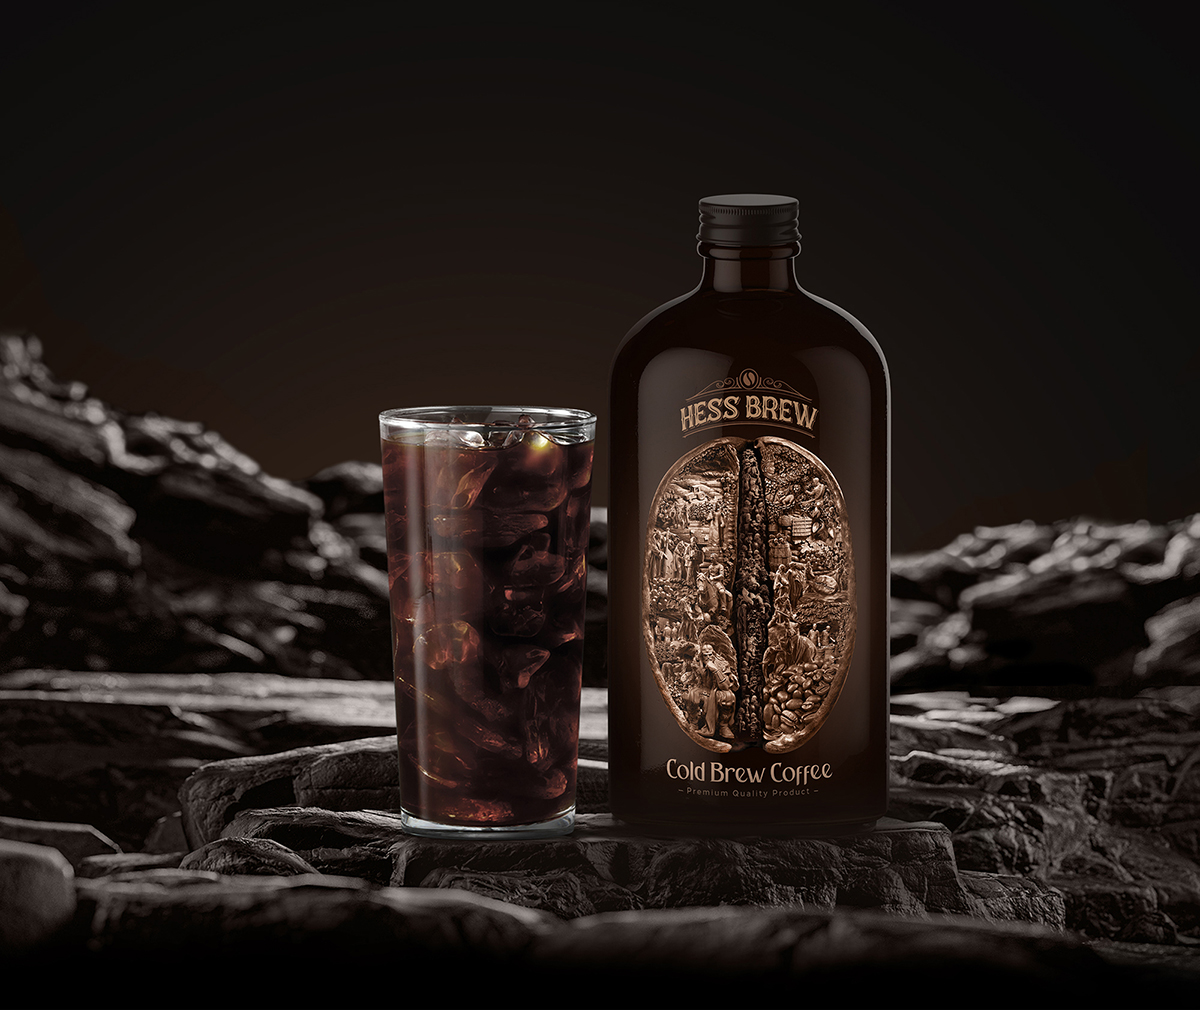 Hess Brew Cold Brew Coffee Packaging Design Designed by Studio Metis